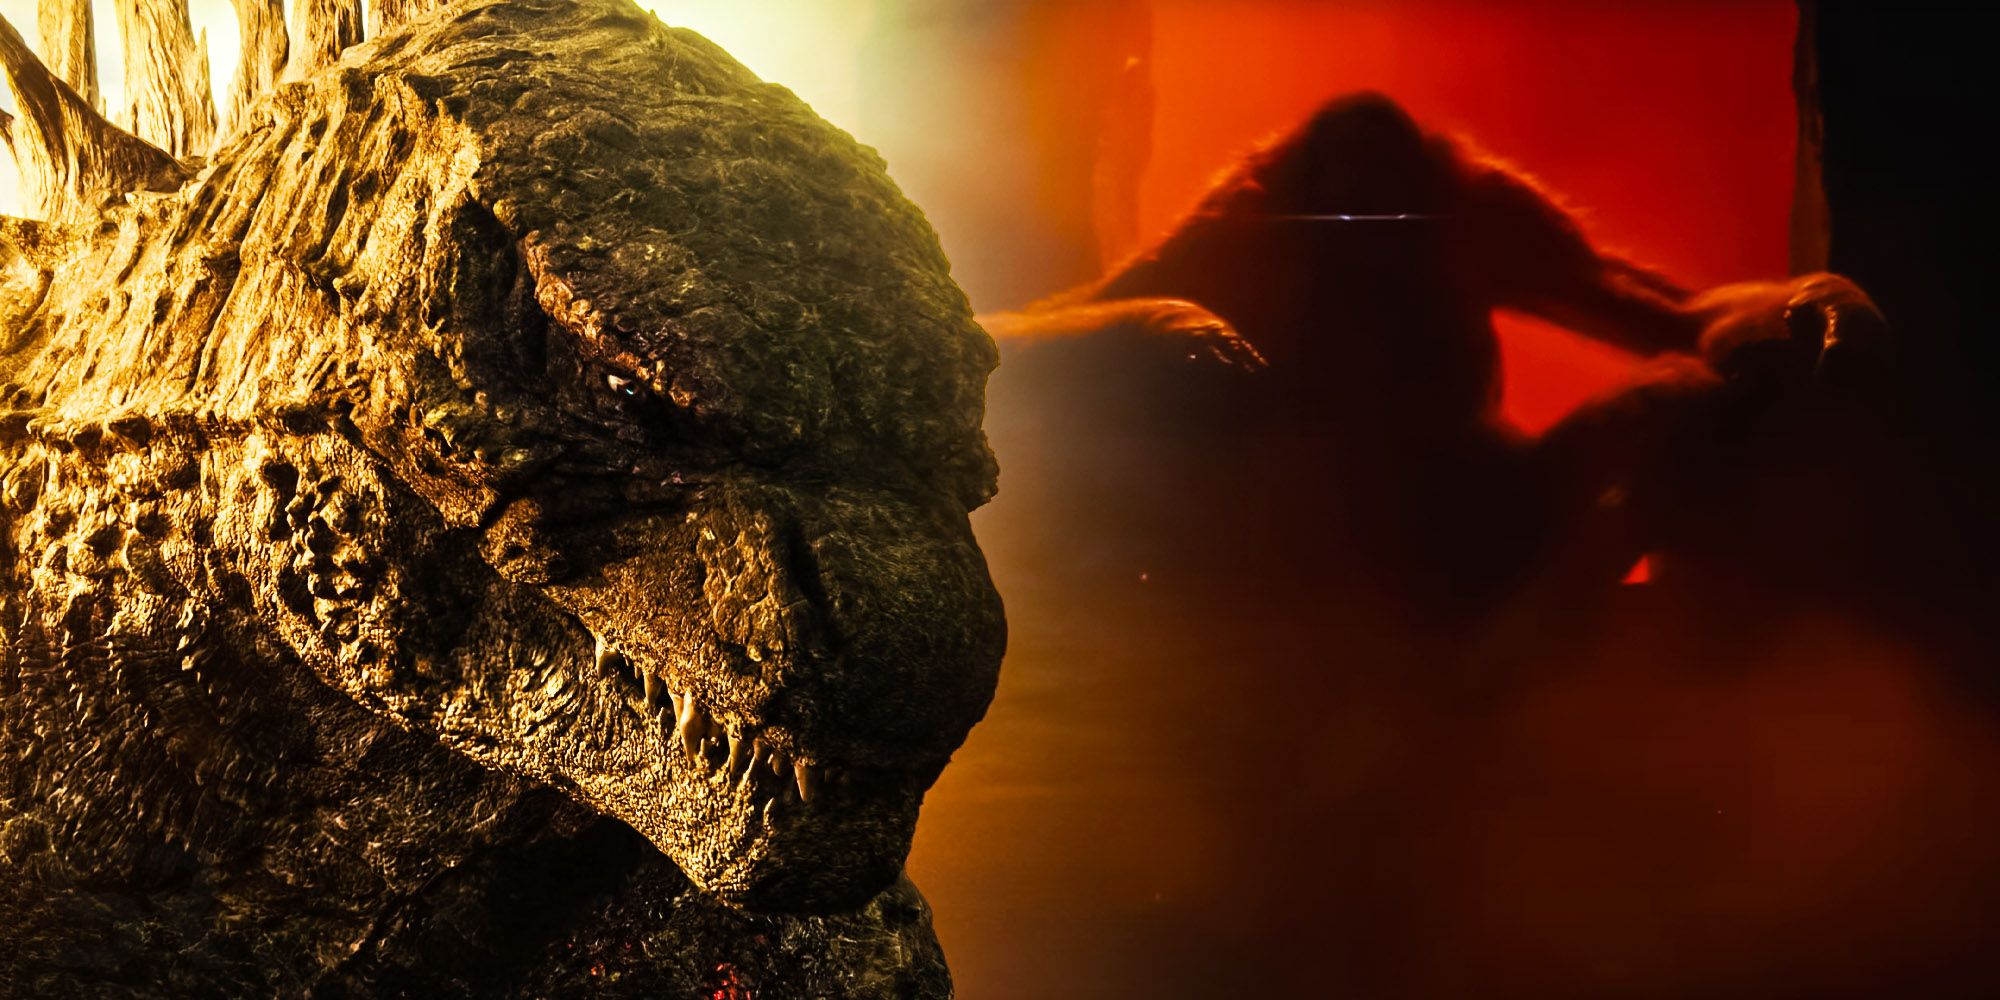 Godzilla x Kong: The New Empire wallpaper Resolution 2000x1000 | Best Download this awesome wallpaper - Cool Wallpaper HD - CoolWallpaper-HD.com